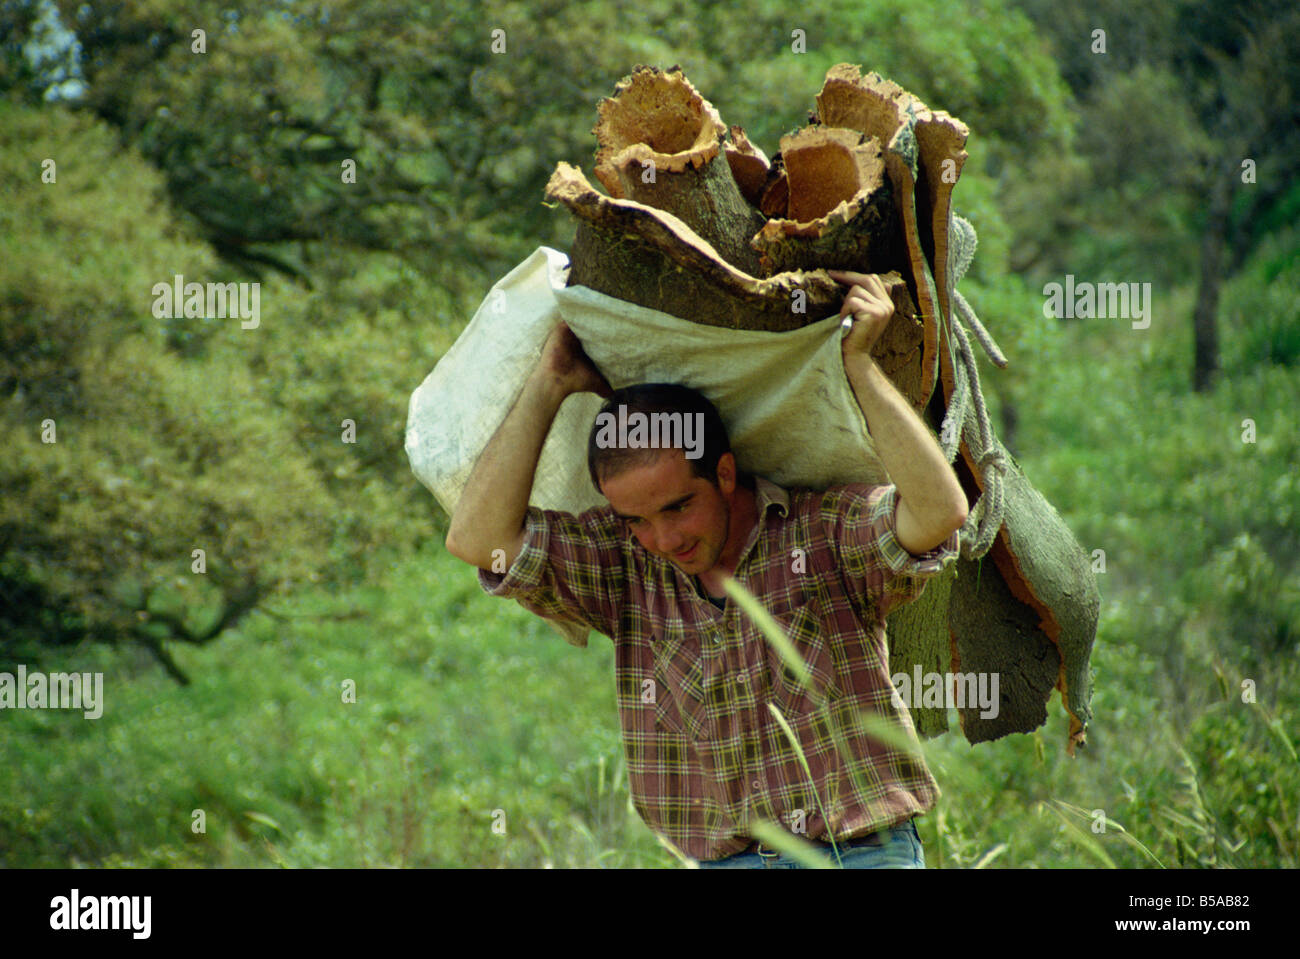 Carrying a load of cork during harvest, Sardinia, Italy, Europe Stock Photo